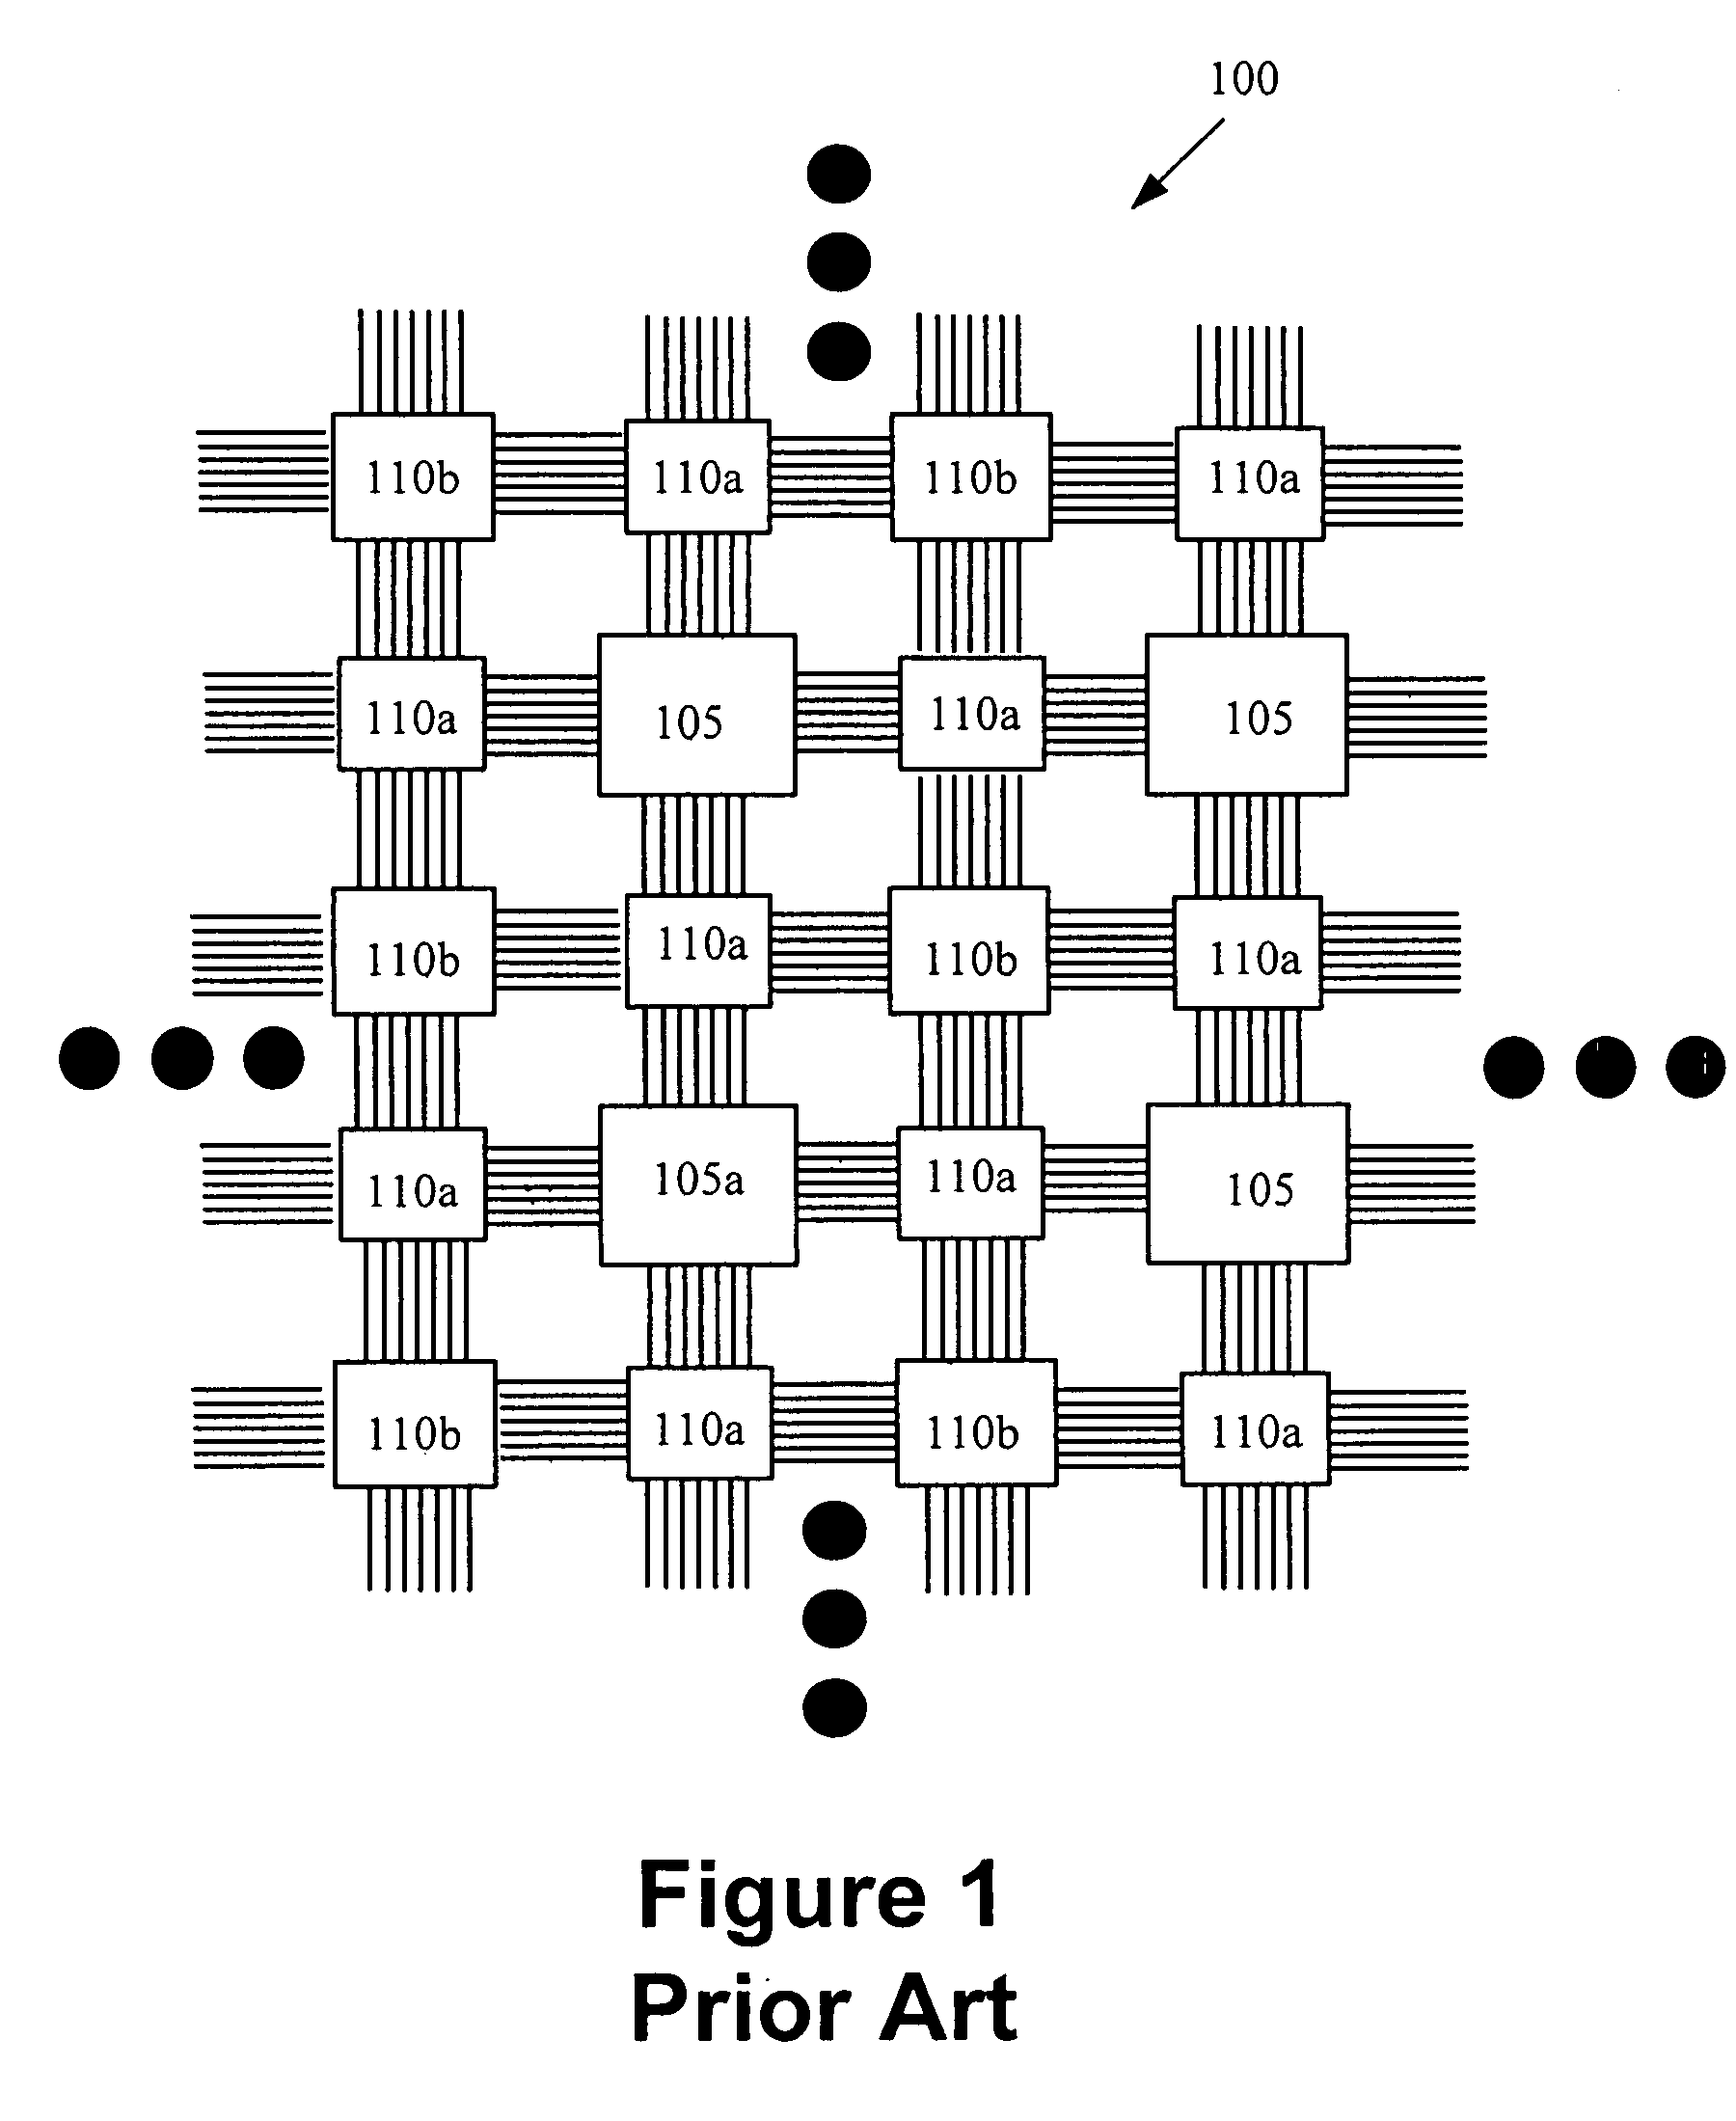 Hybrid interconnect/logic circuits enabling efficient replication of a function in several sub-cycles to save logic and routing resources